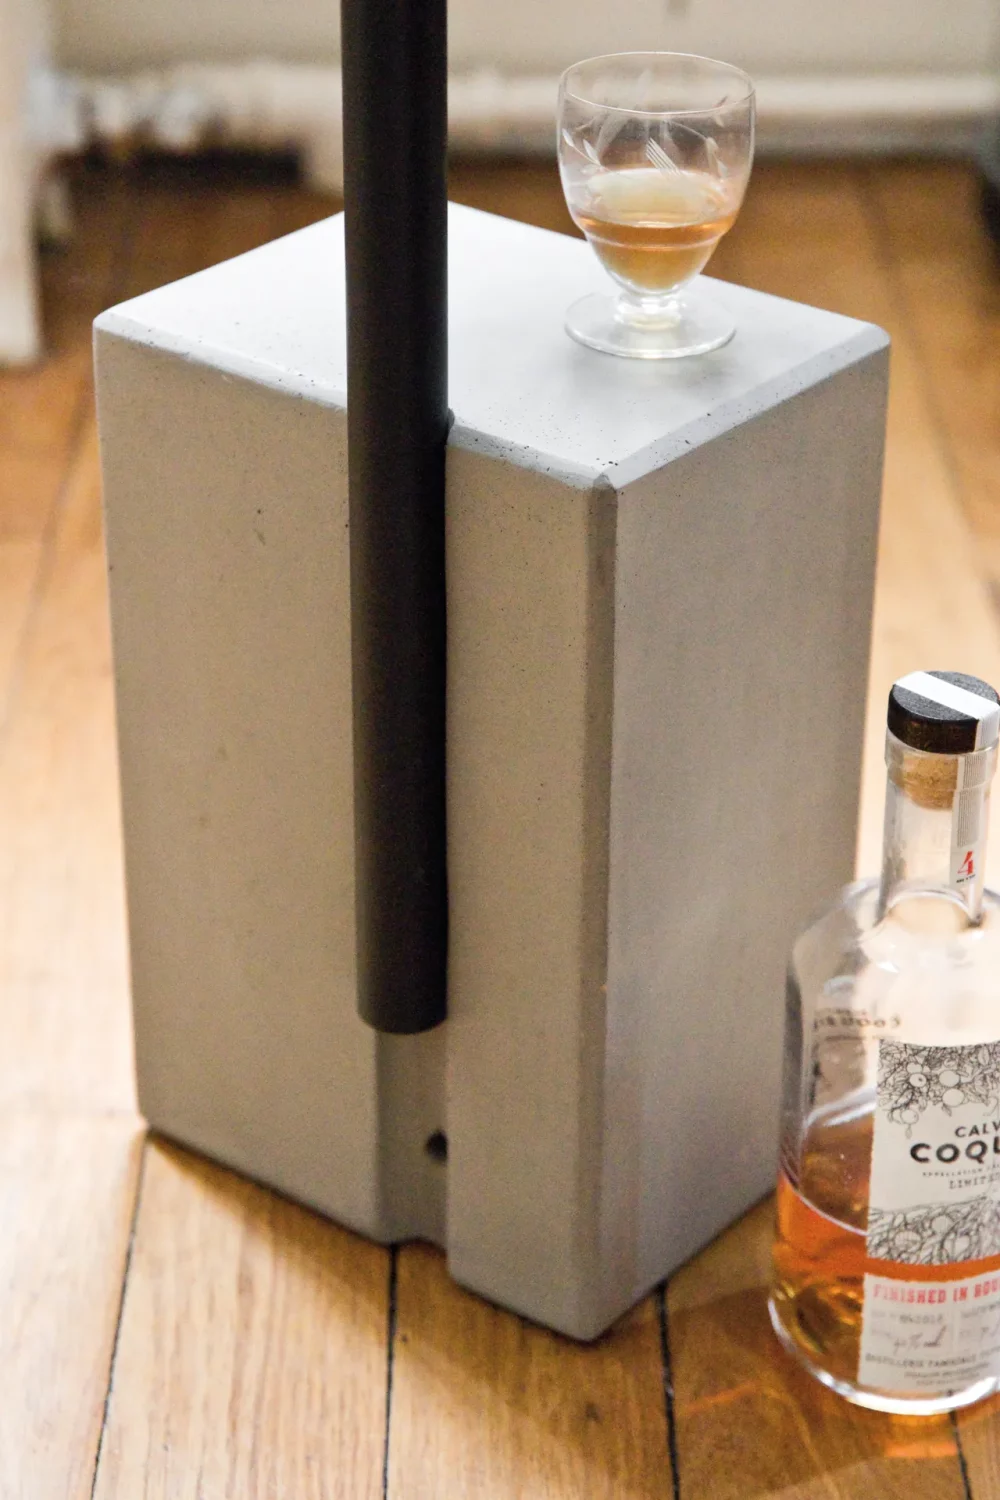 Small but practical, you can also use the concrete ballast to store or deposit objects